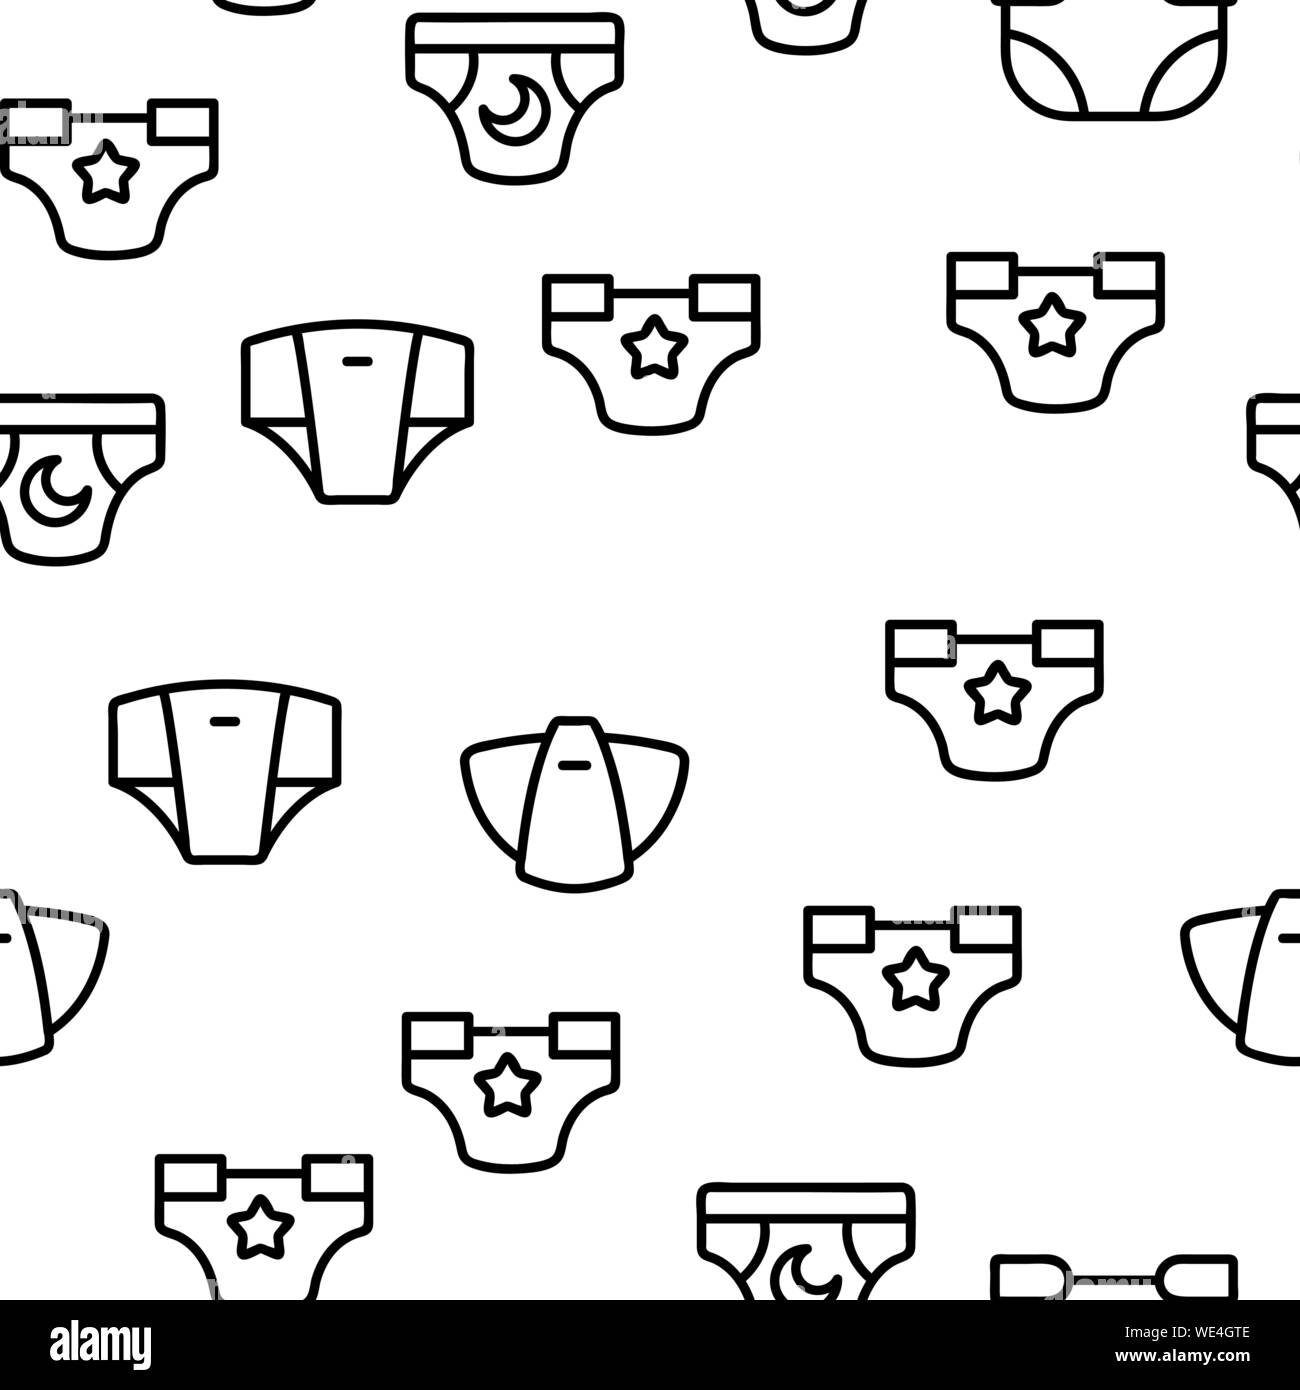 Baby Absorbent Diapers Vector Seamless Pattern Stock Vector